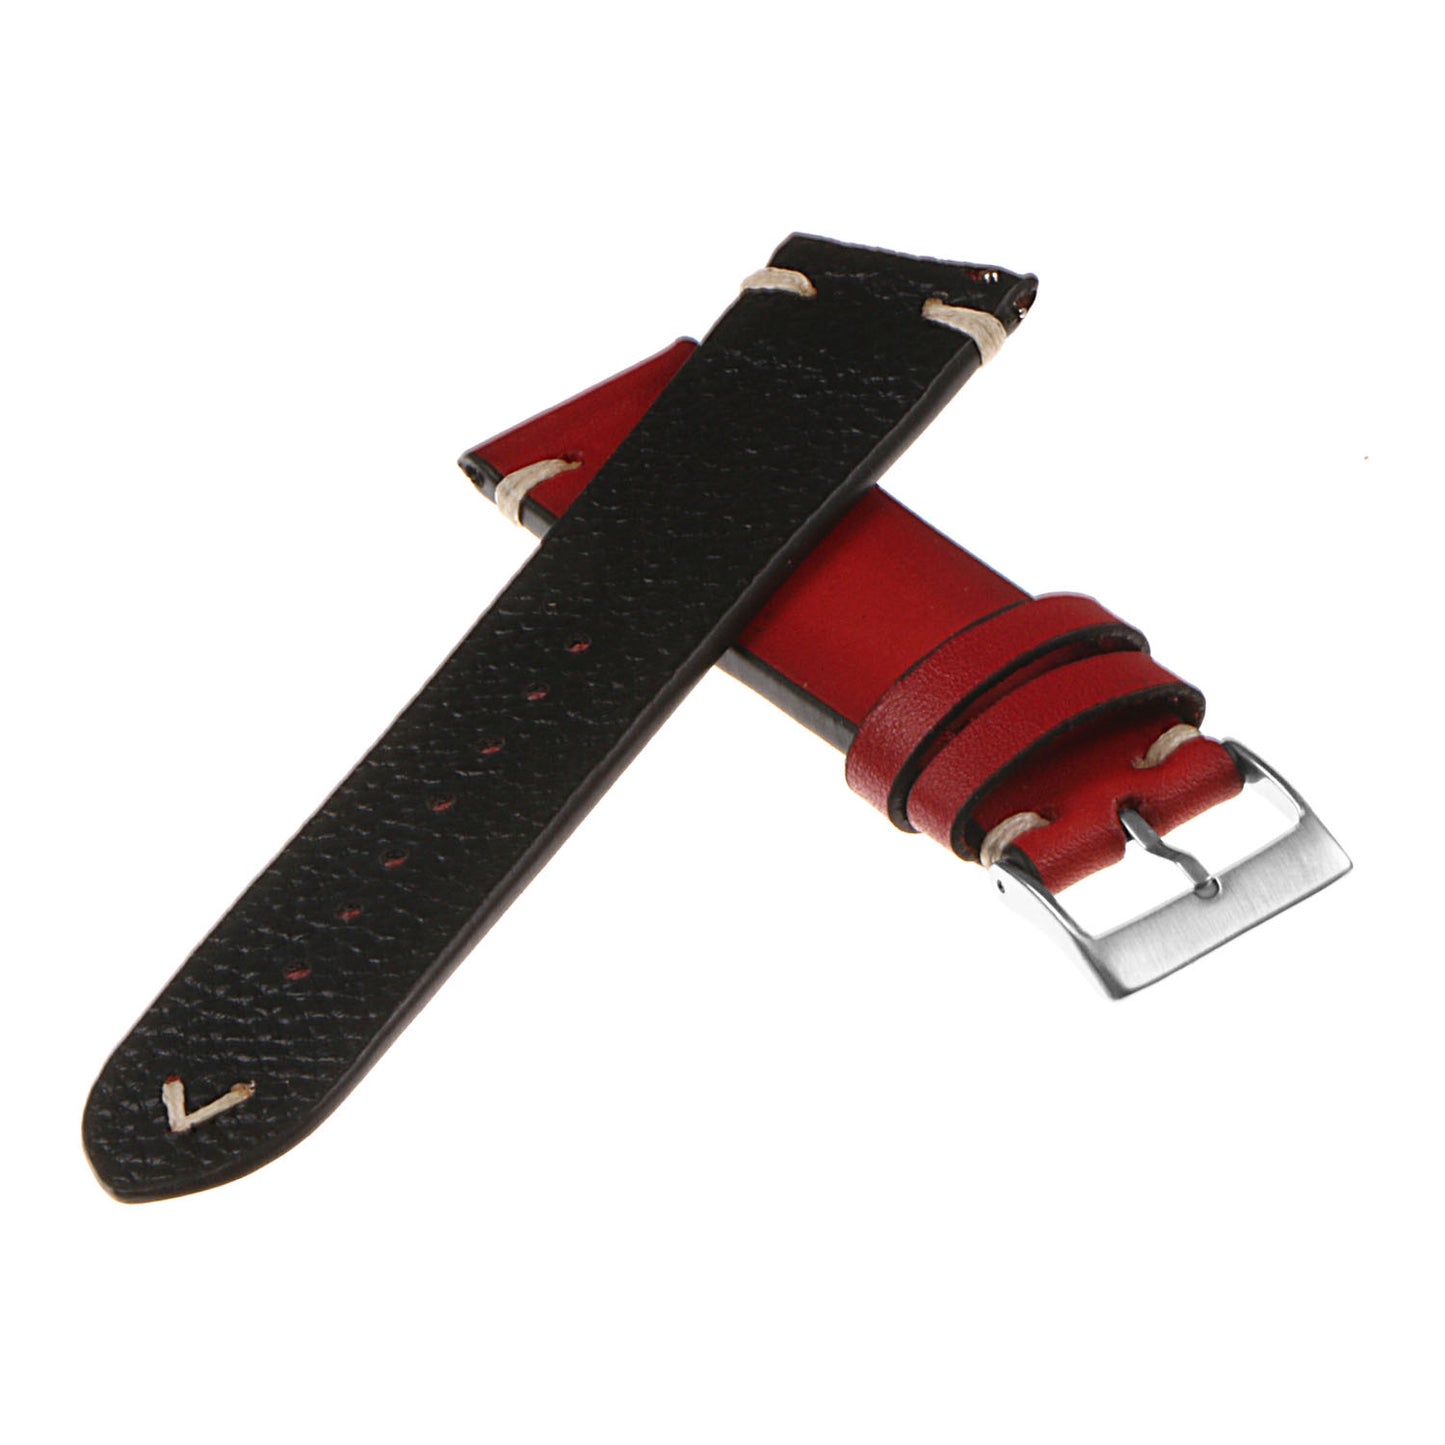 Hand-Stitched Vintage Faded Leather Strap for Garmin Forerunner 745